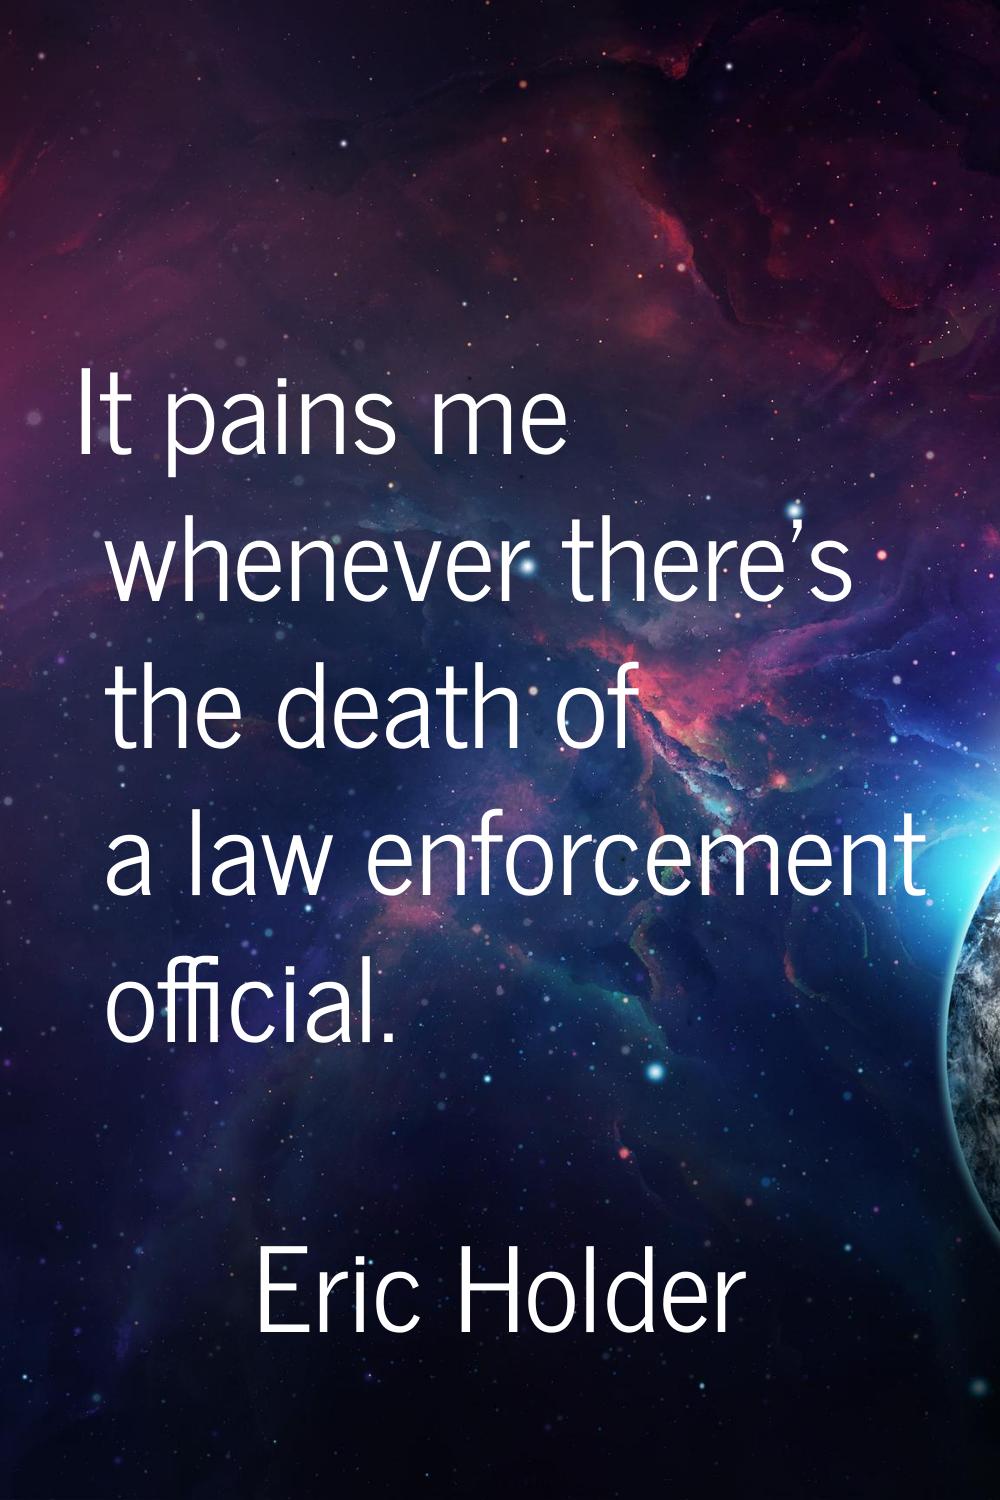 It pains me whenever there's the death of a law enforcement official.